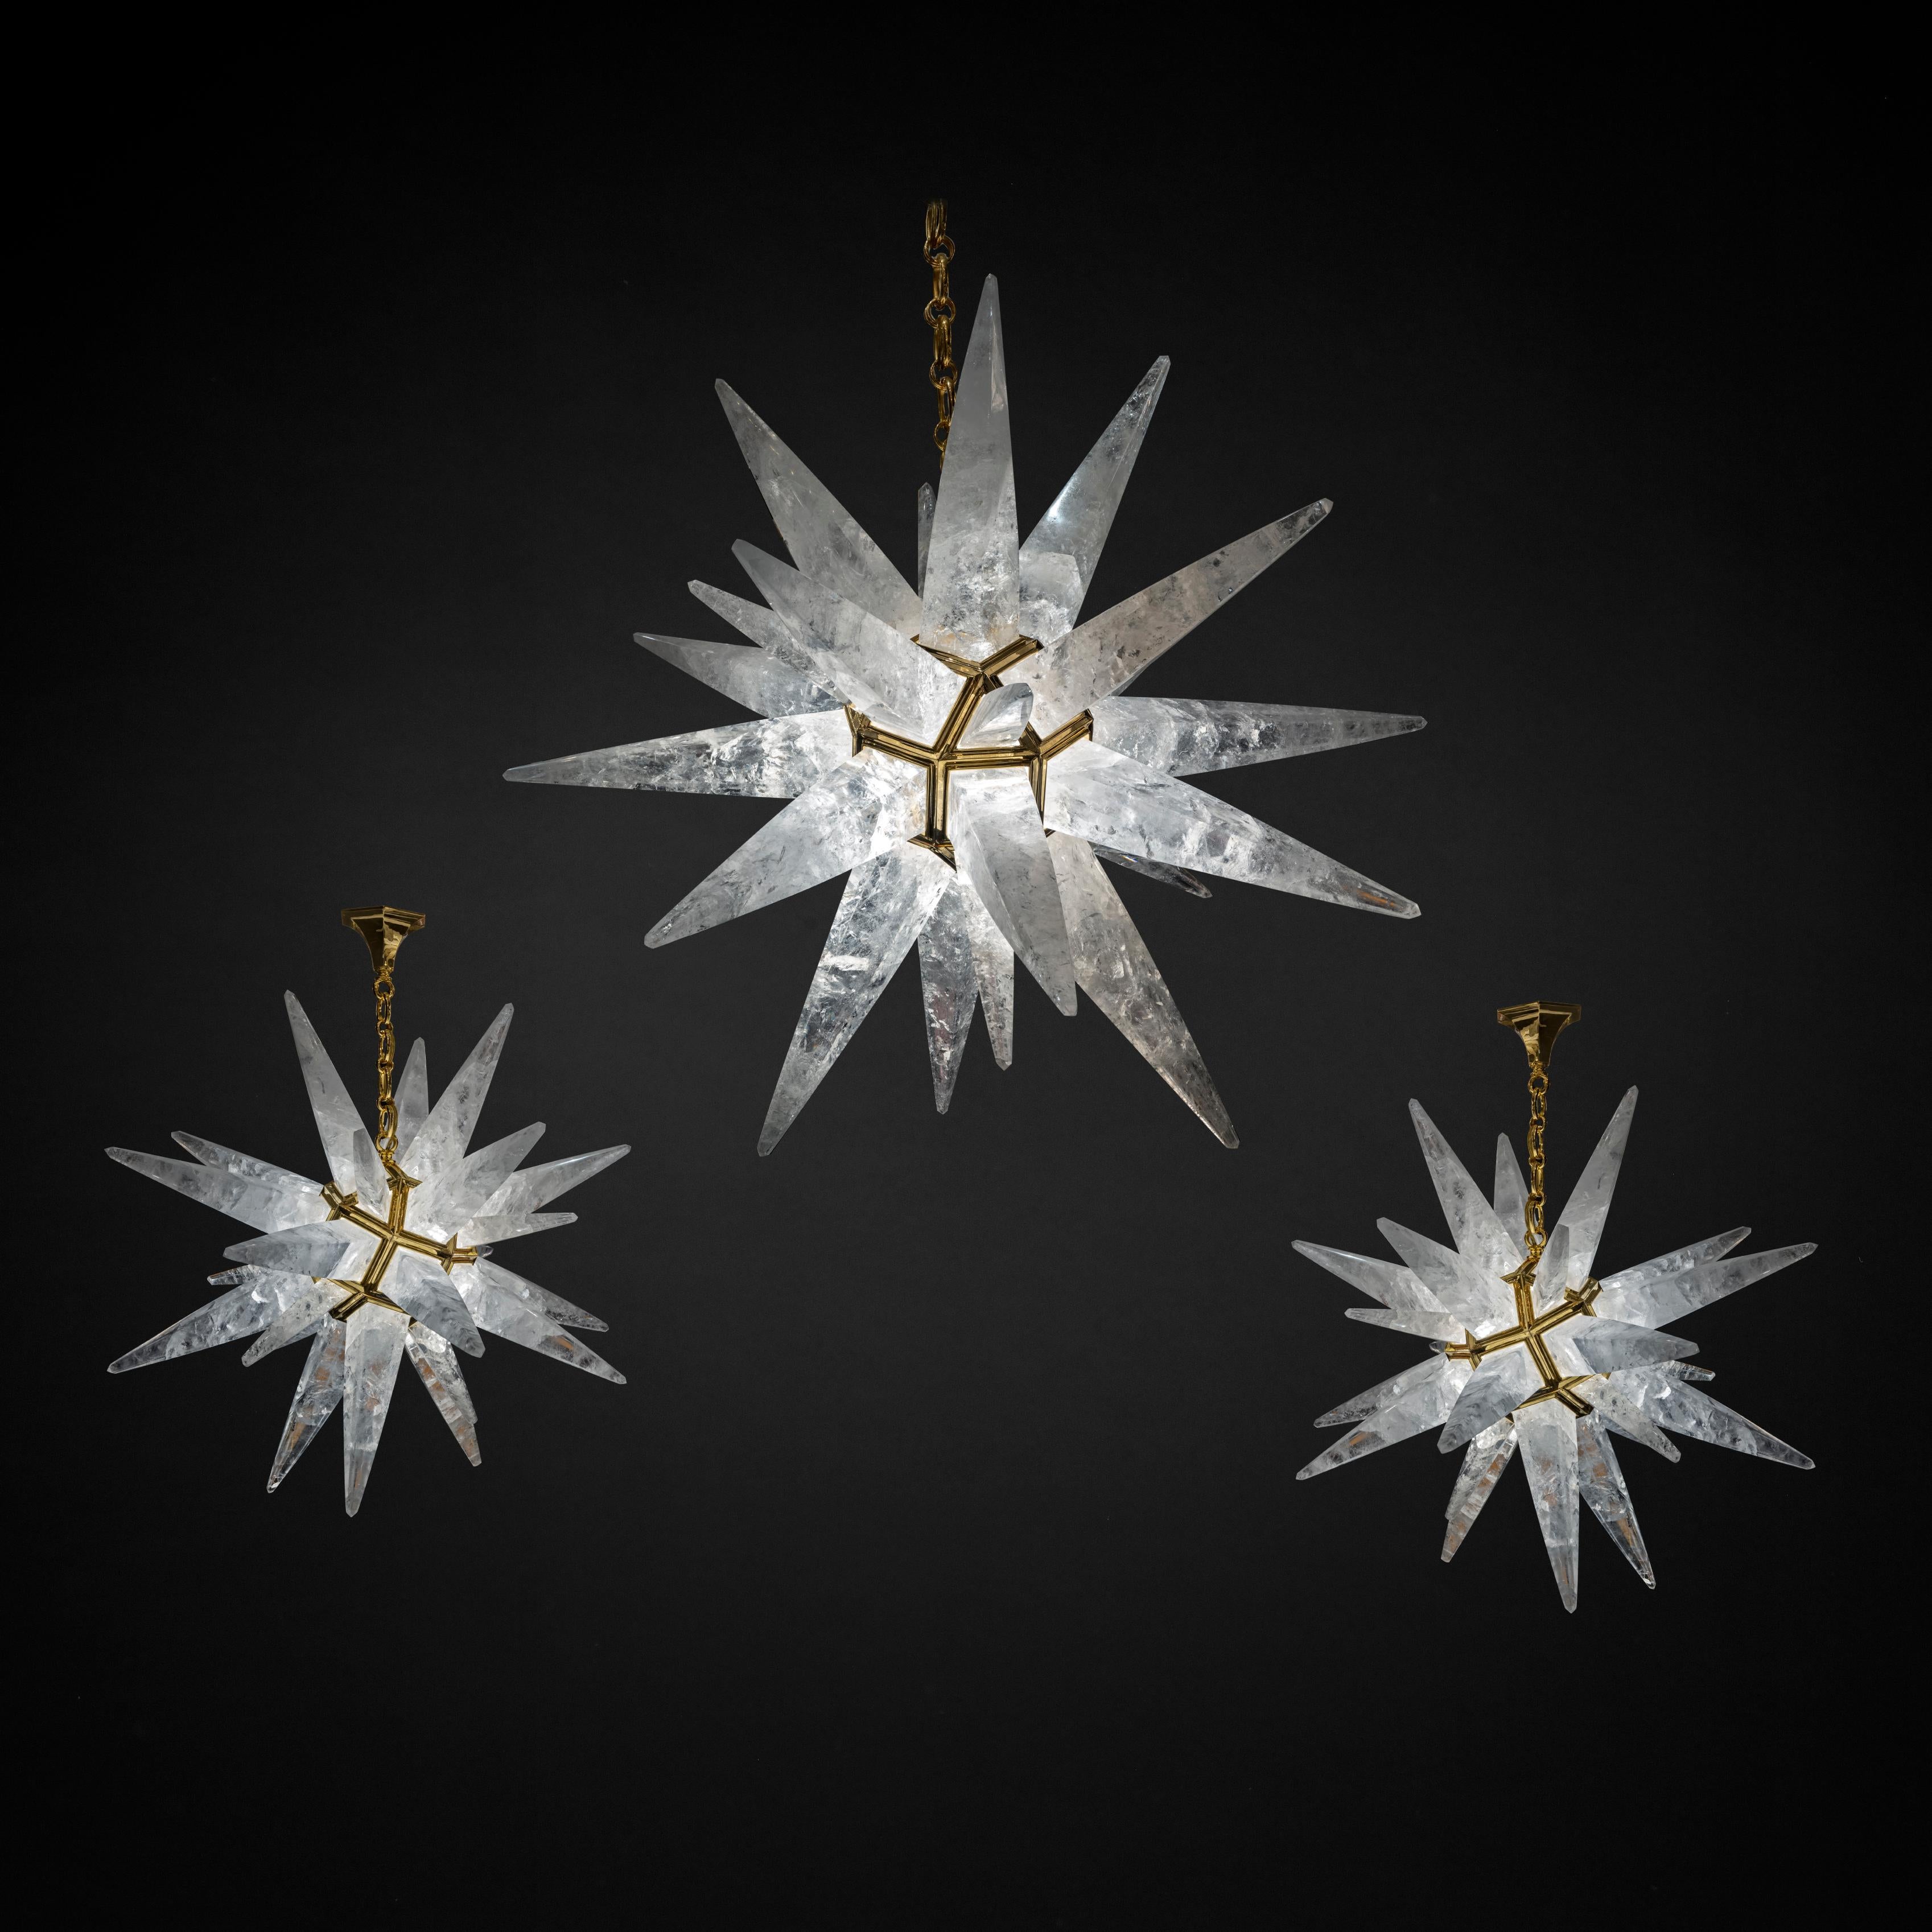 Exclusive set of three rock crystal stars chandeliers made in France.
Made by request at your finition.
Measures: Star I : 30 inches diameter
Ultimate Star : 40 inches diameter.
Make your interior fabulous.
What else ?.